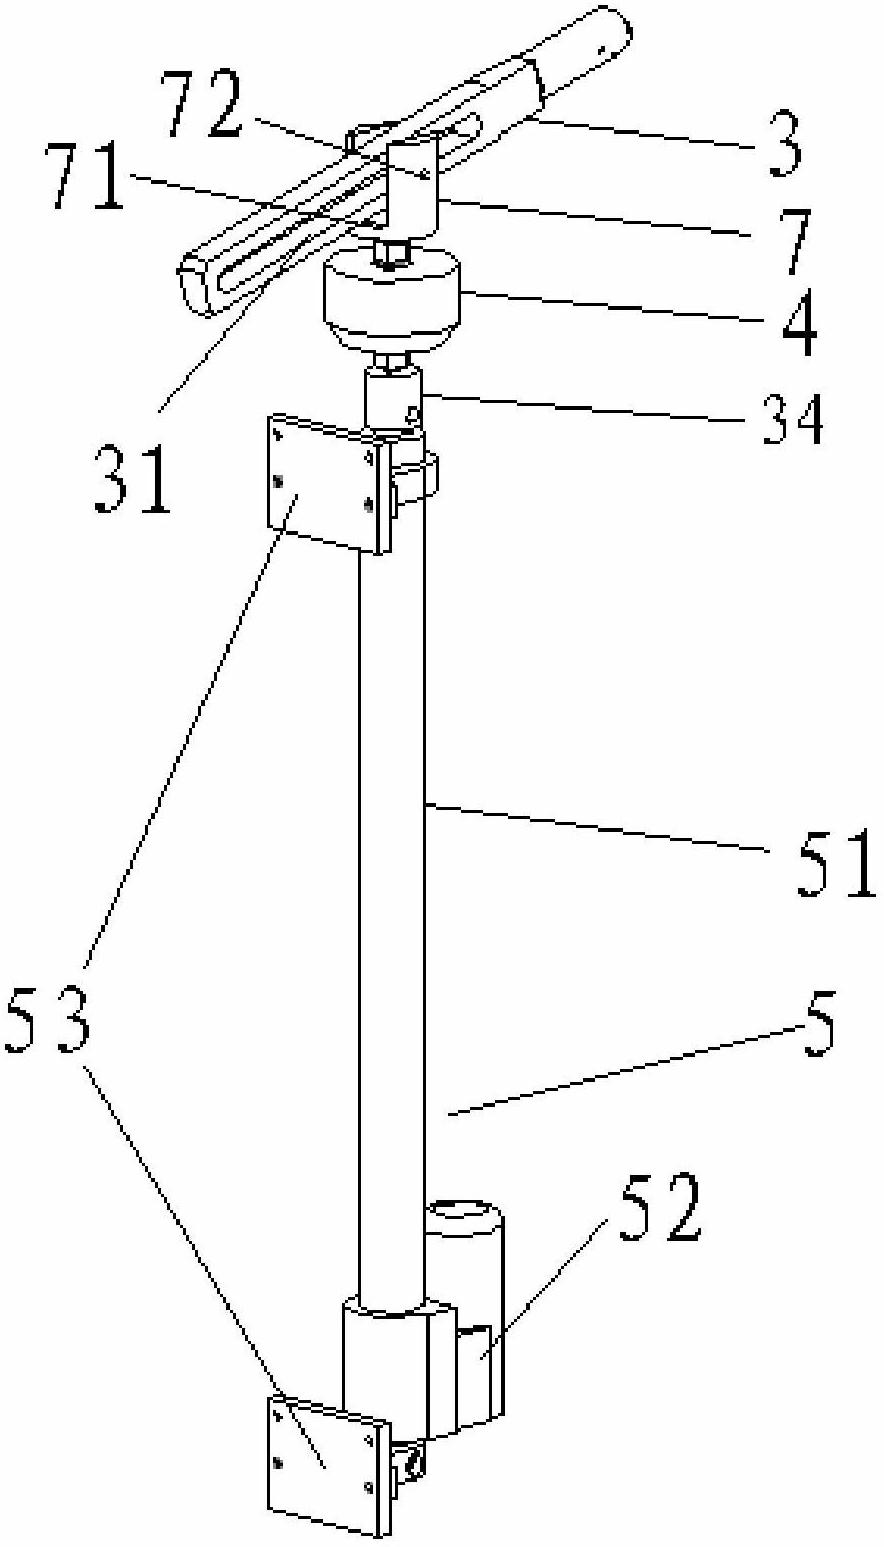 Dummy hip joint calibration system and method for automobile collision